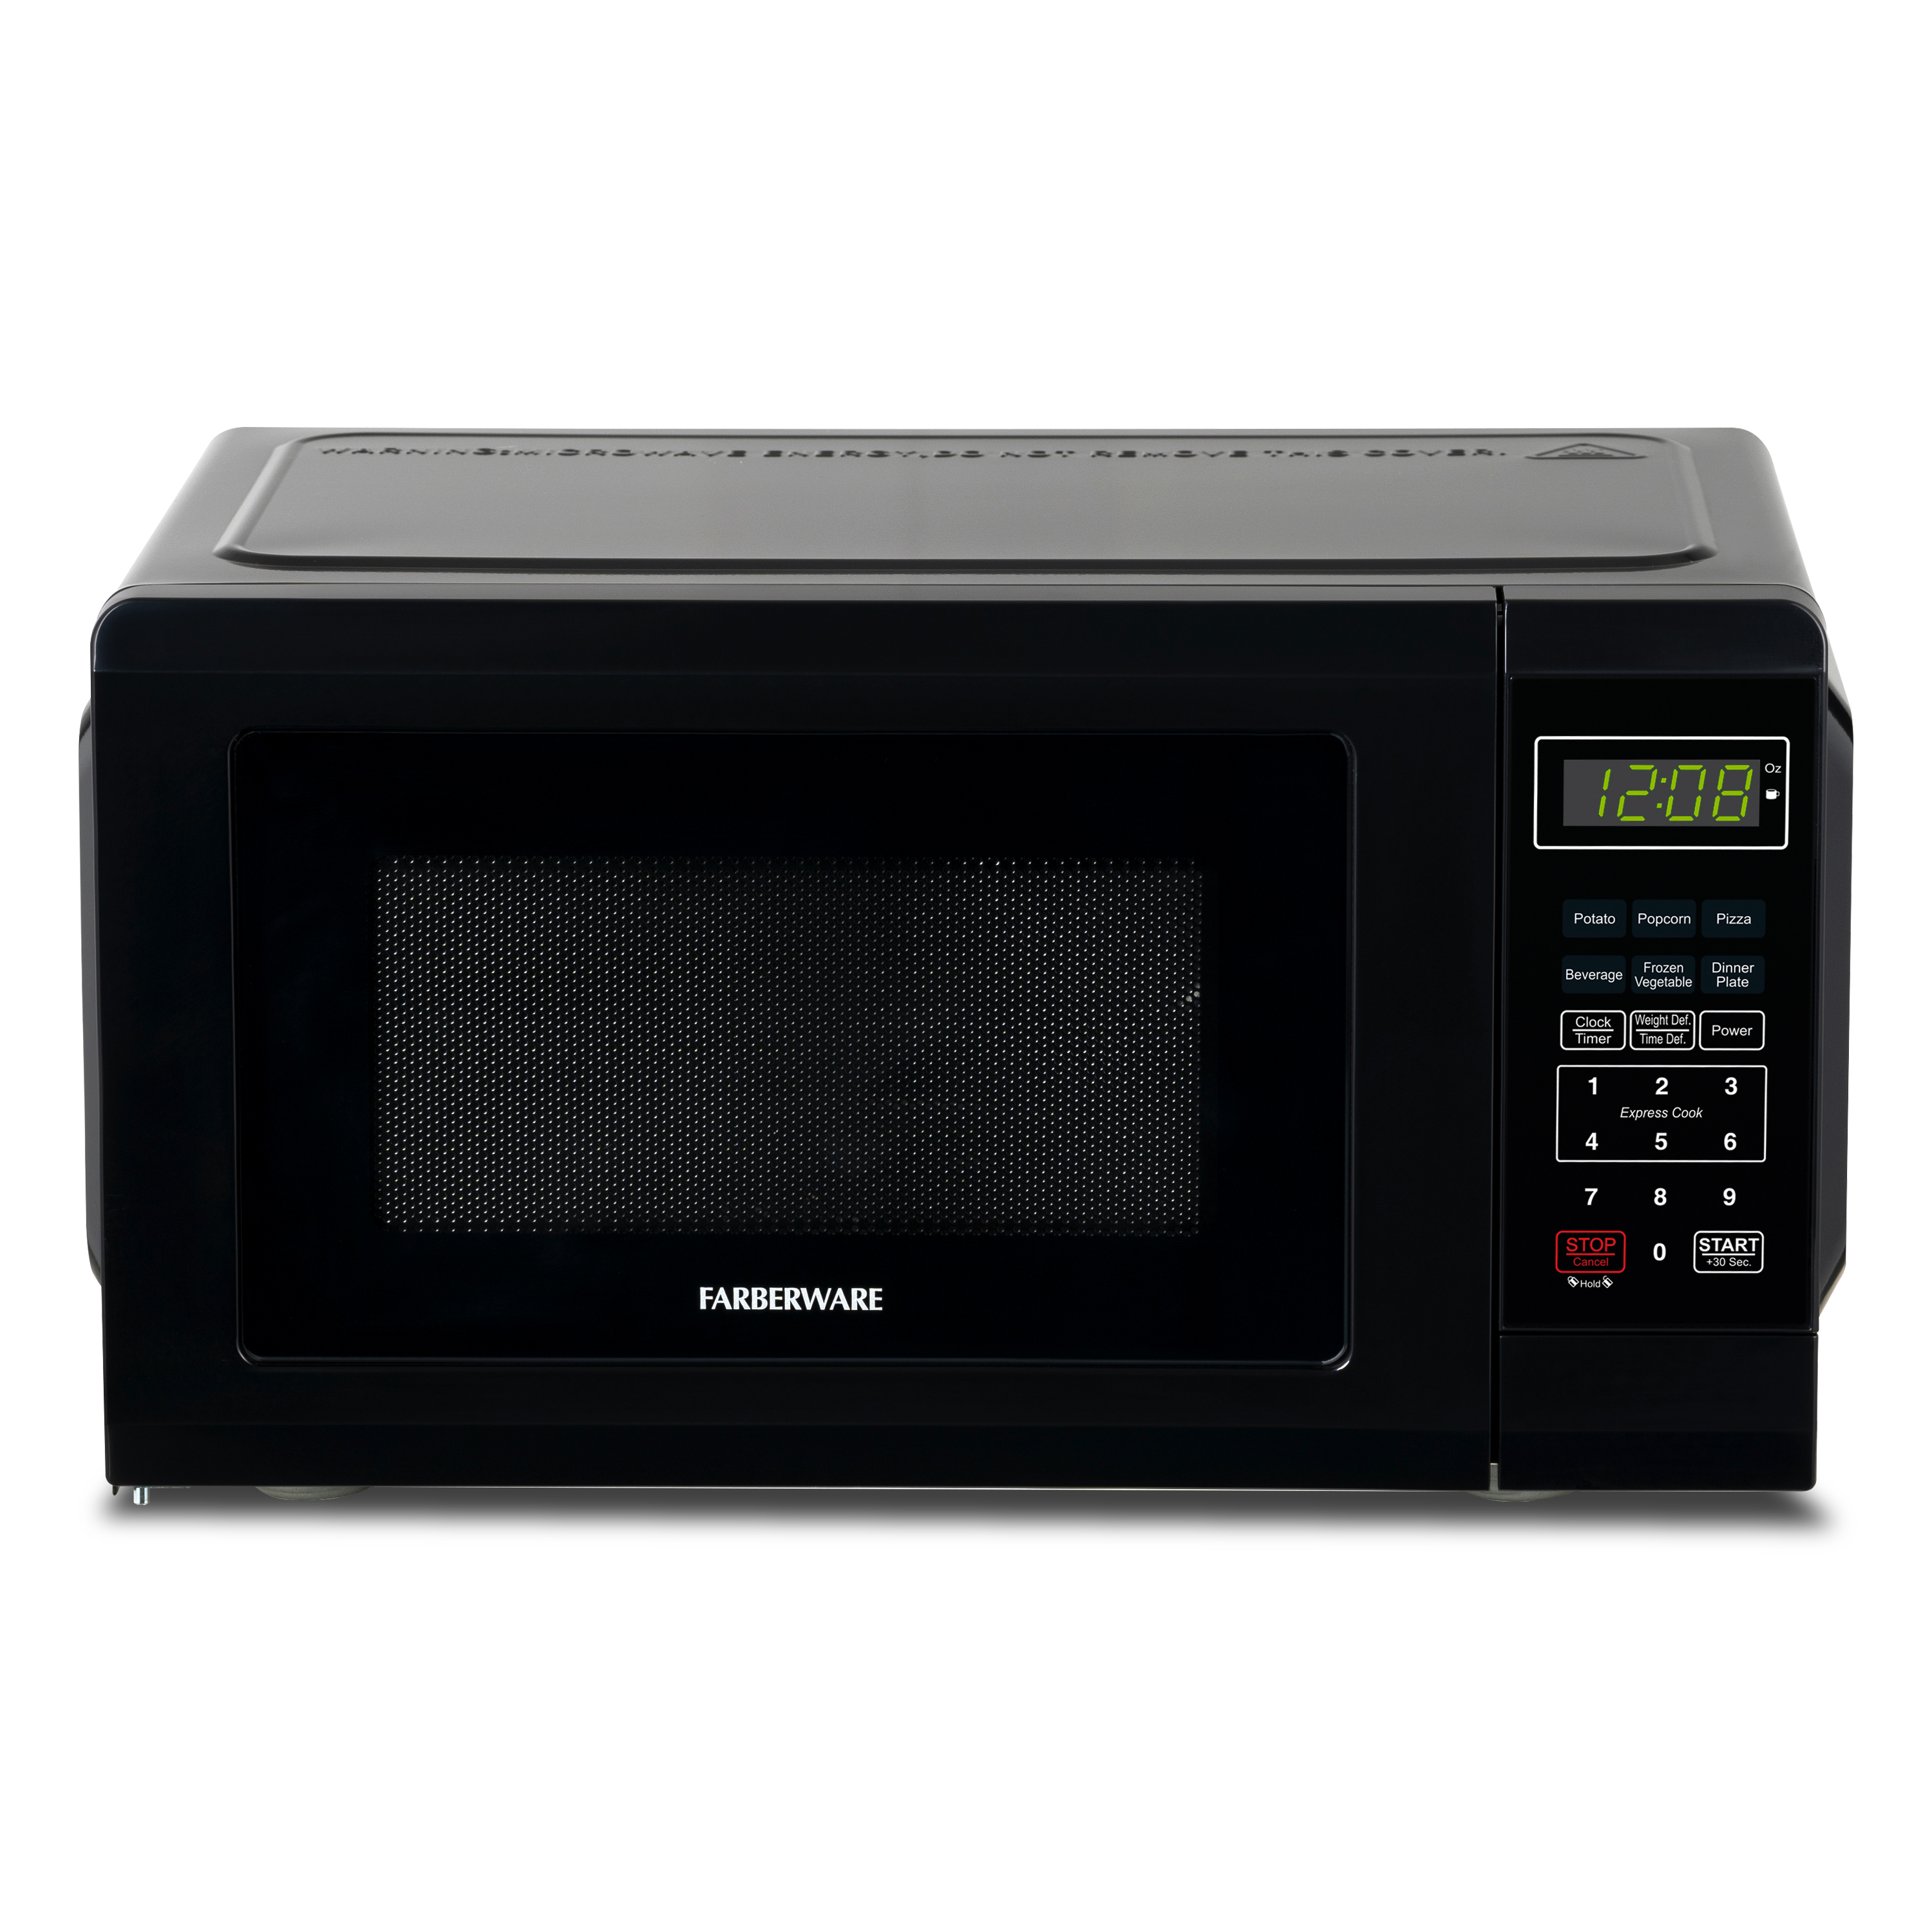 Farberware Countertop Microwave Oven with LED Lighting & Child Lock, 0.7 Cu Ft Black - image 1 of 6